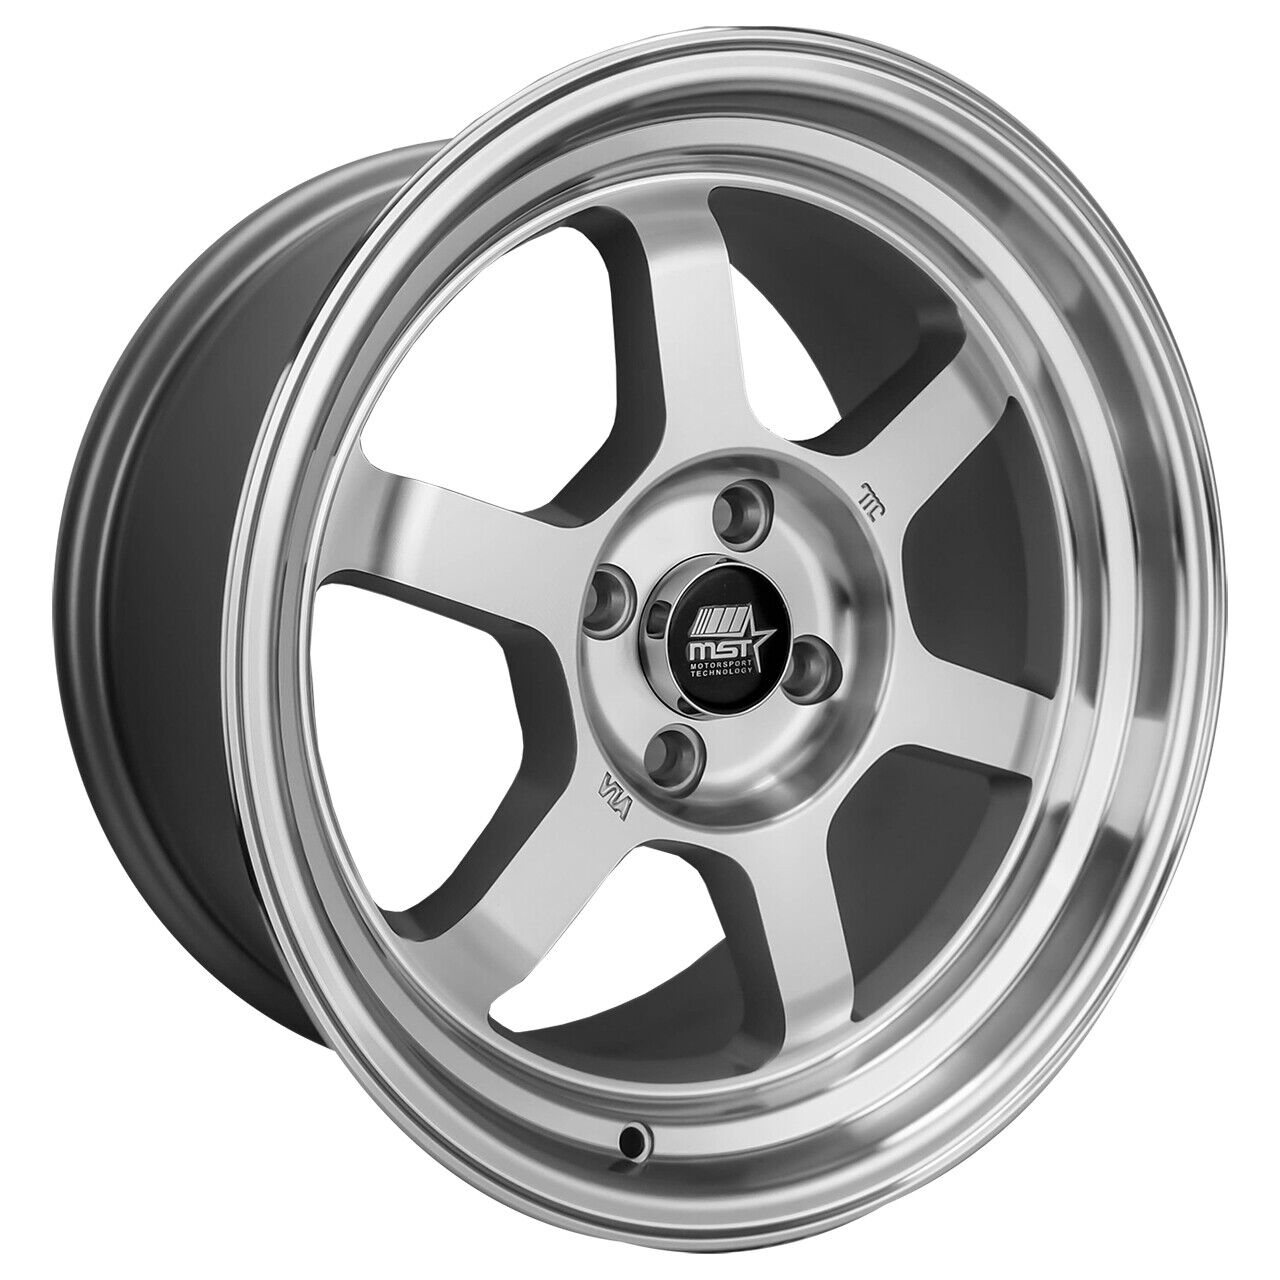 MST Time Attack Rim 15X8 5X114.3 Offset 35 Machined (Quantity of 1)